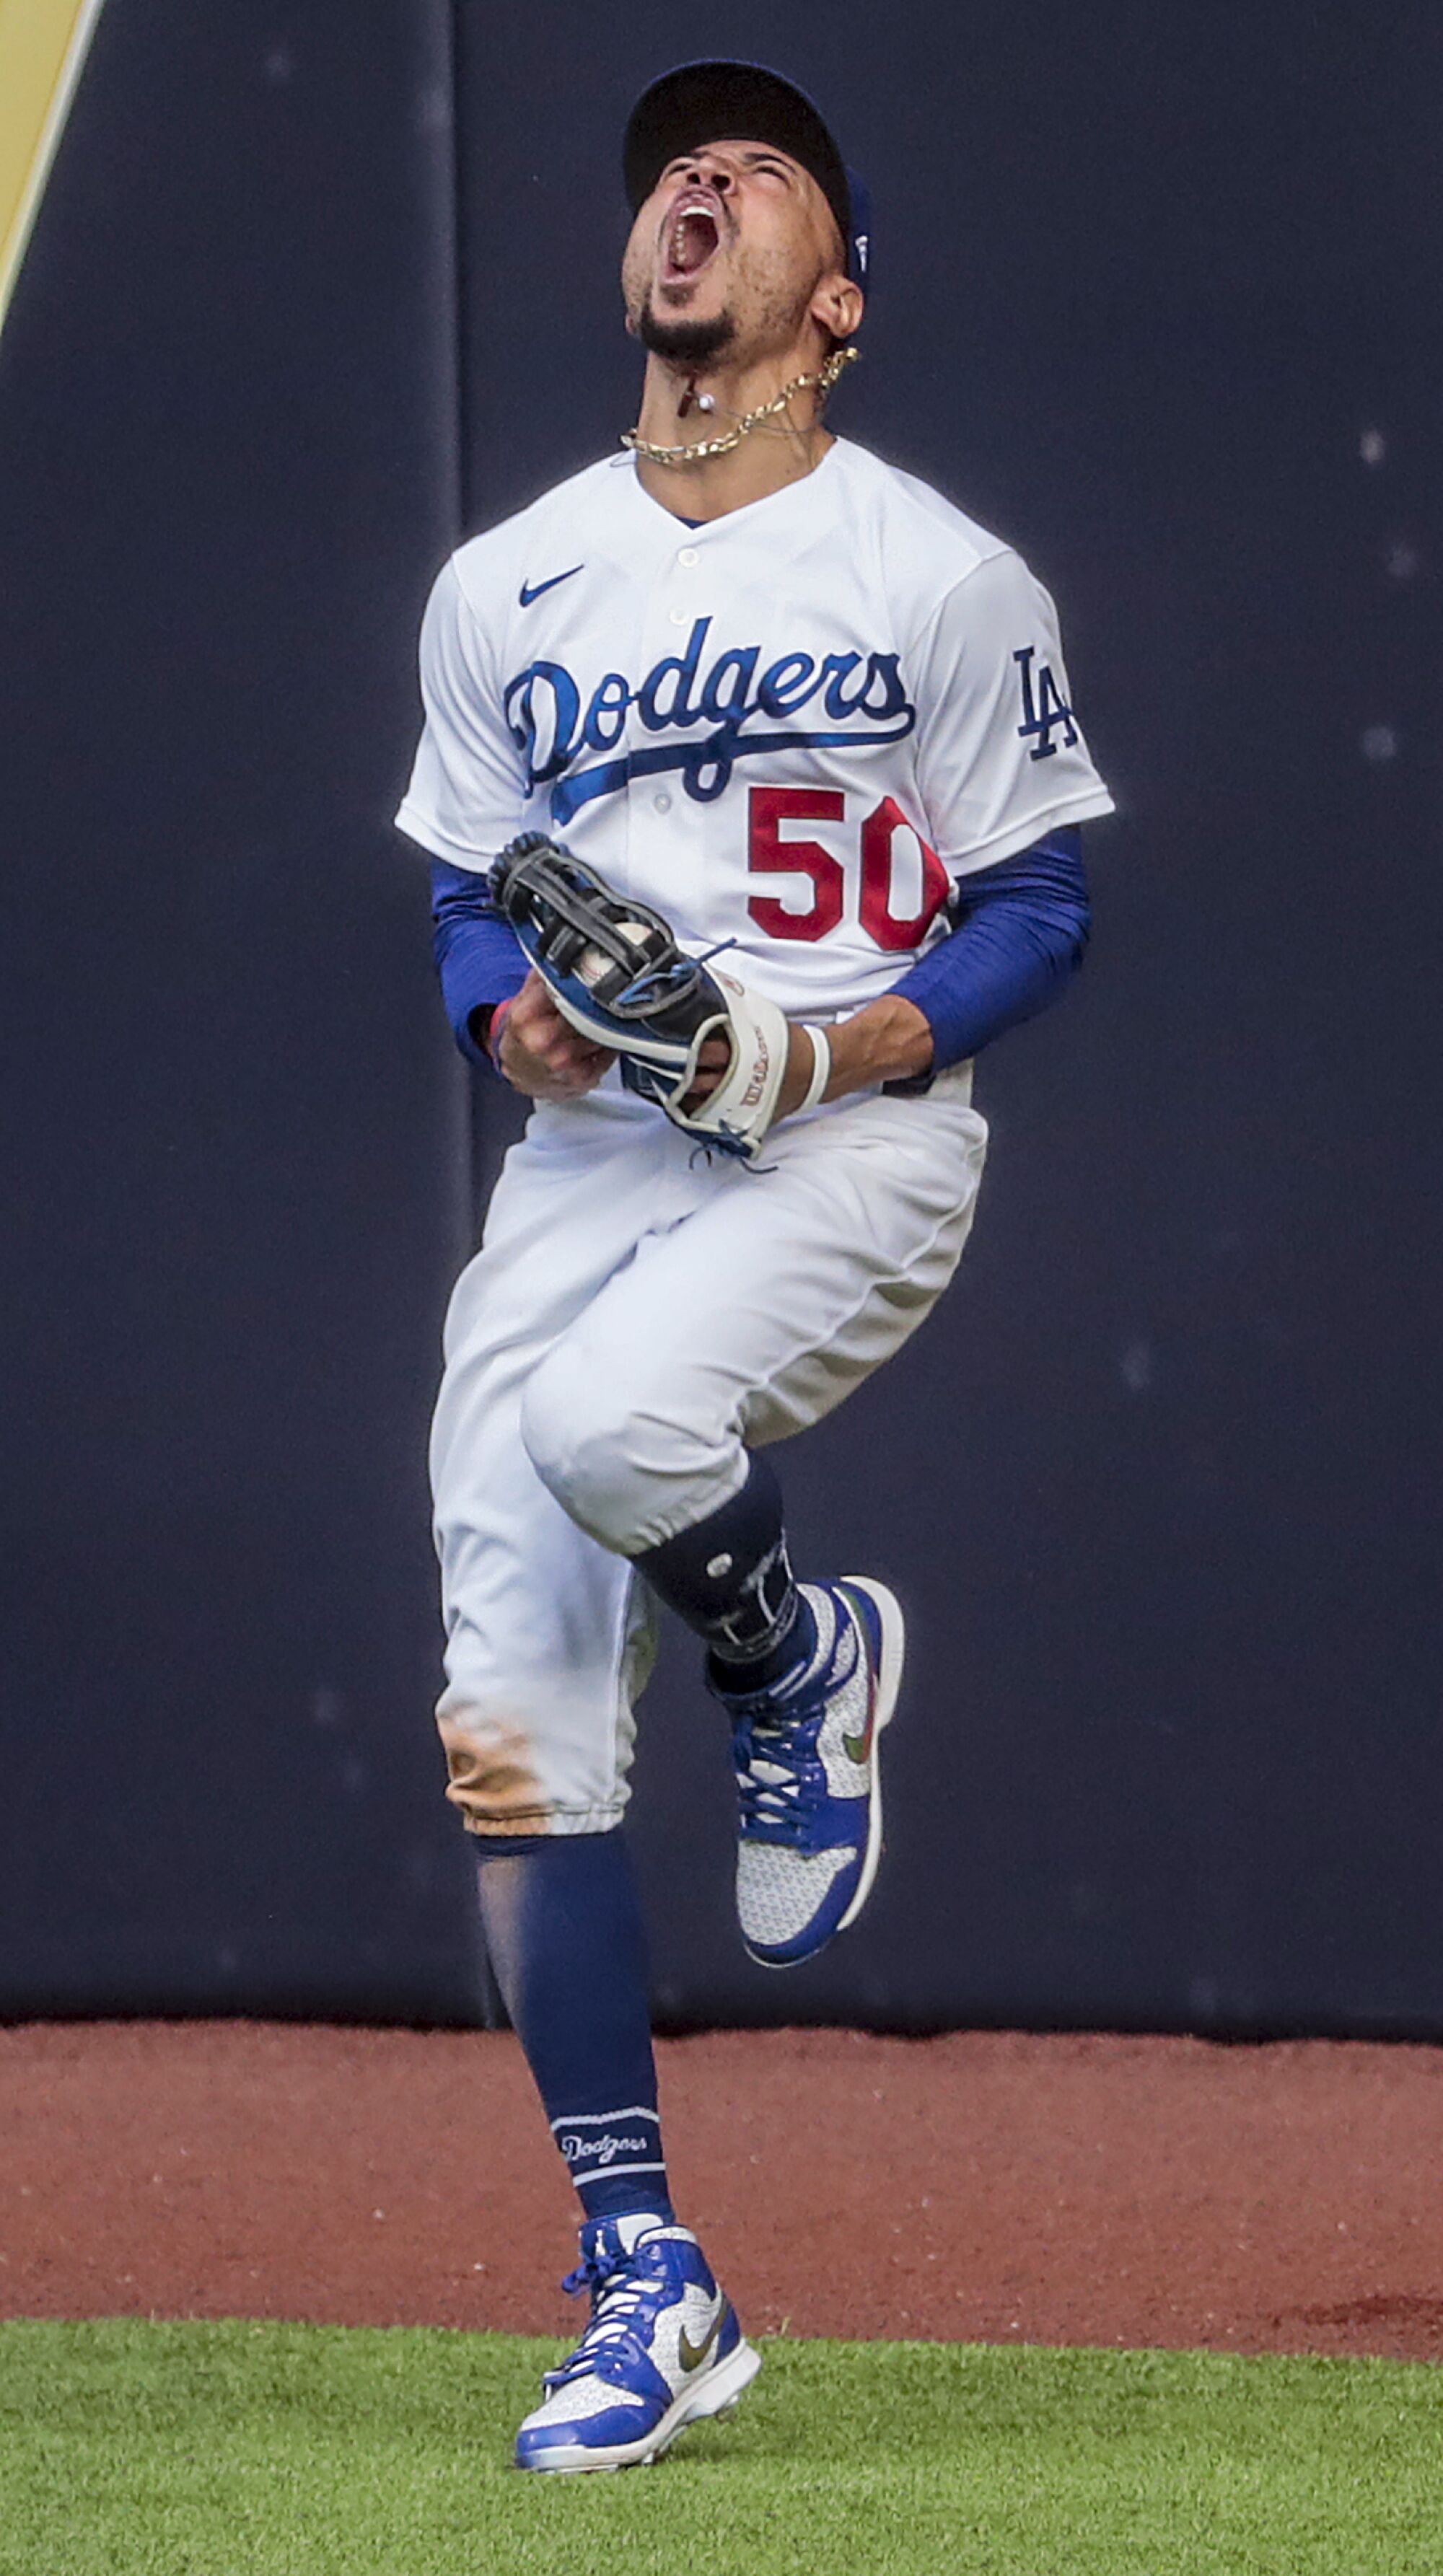 Dodgers right fielder Mookie Betts celebrates his leaping catch at the wall during the fifth inning.